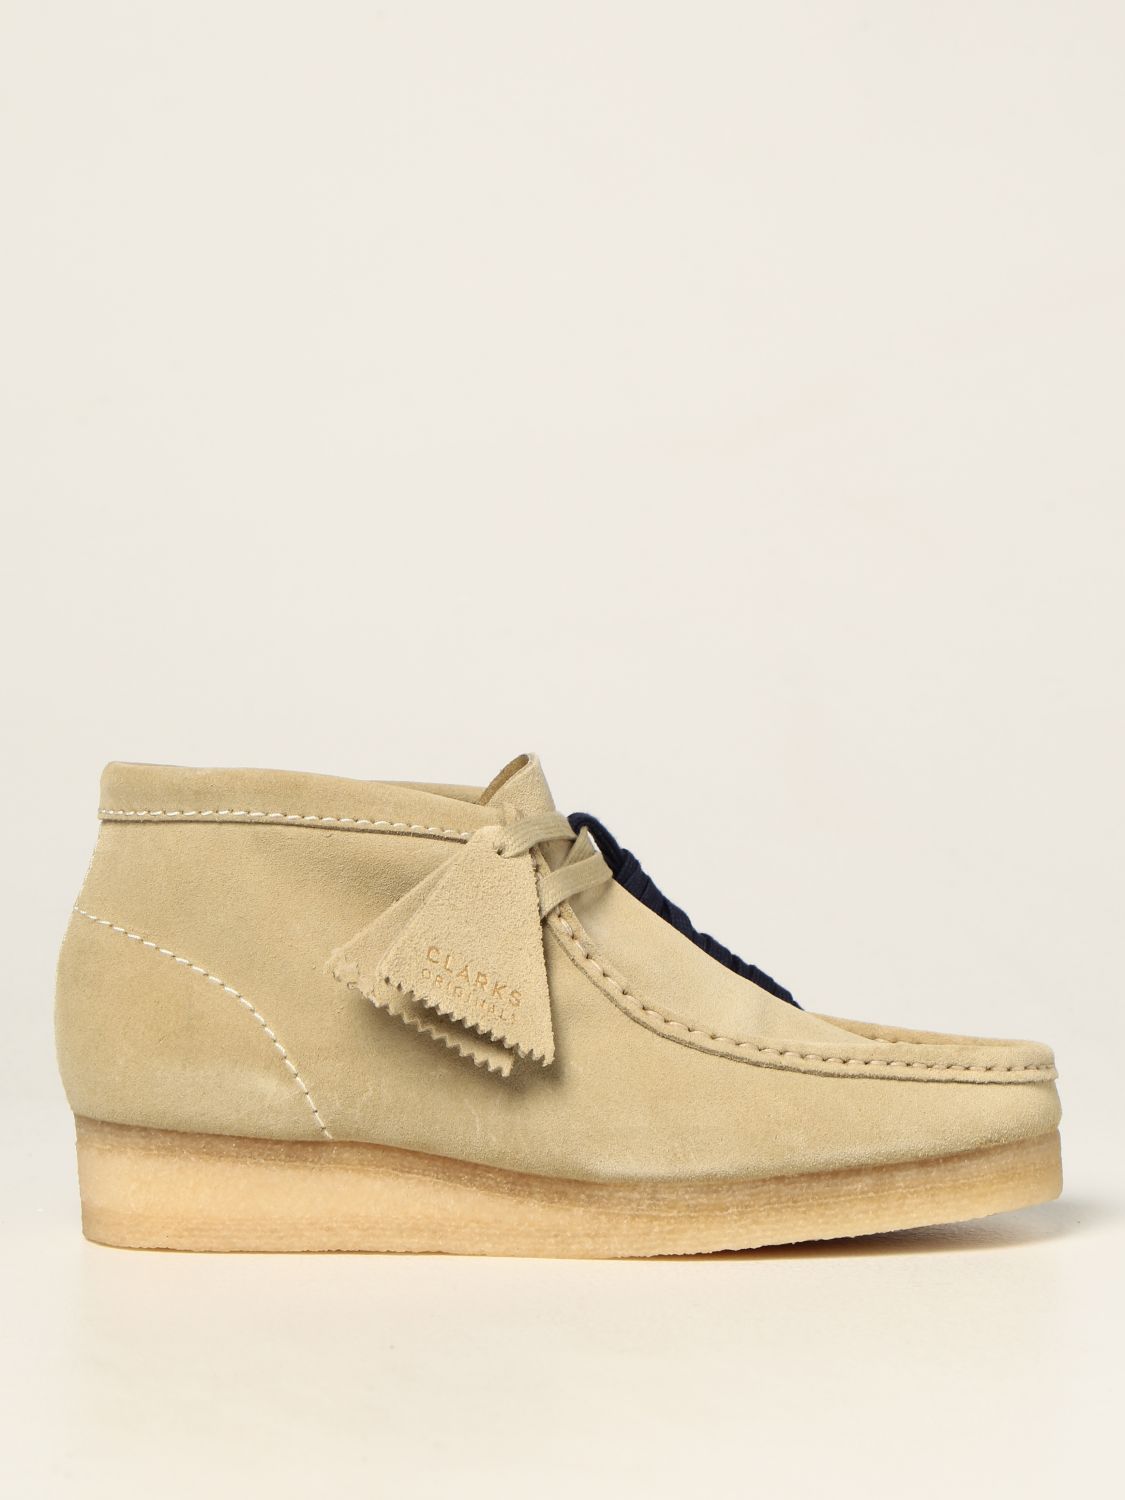 CLARKS: Wallabee Originals moccasins in suede | Shoes Clarks Women Rust | Oxford Shoes Clarks 155520 GIGLIO.COM